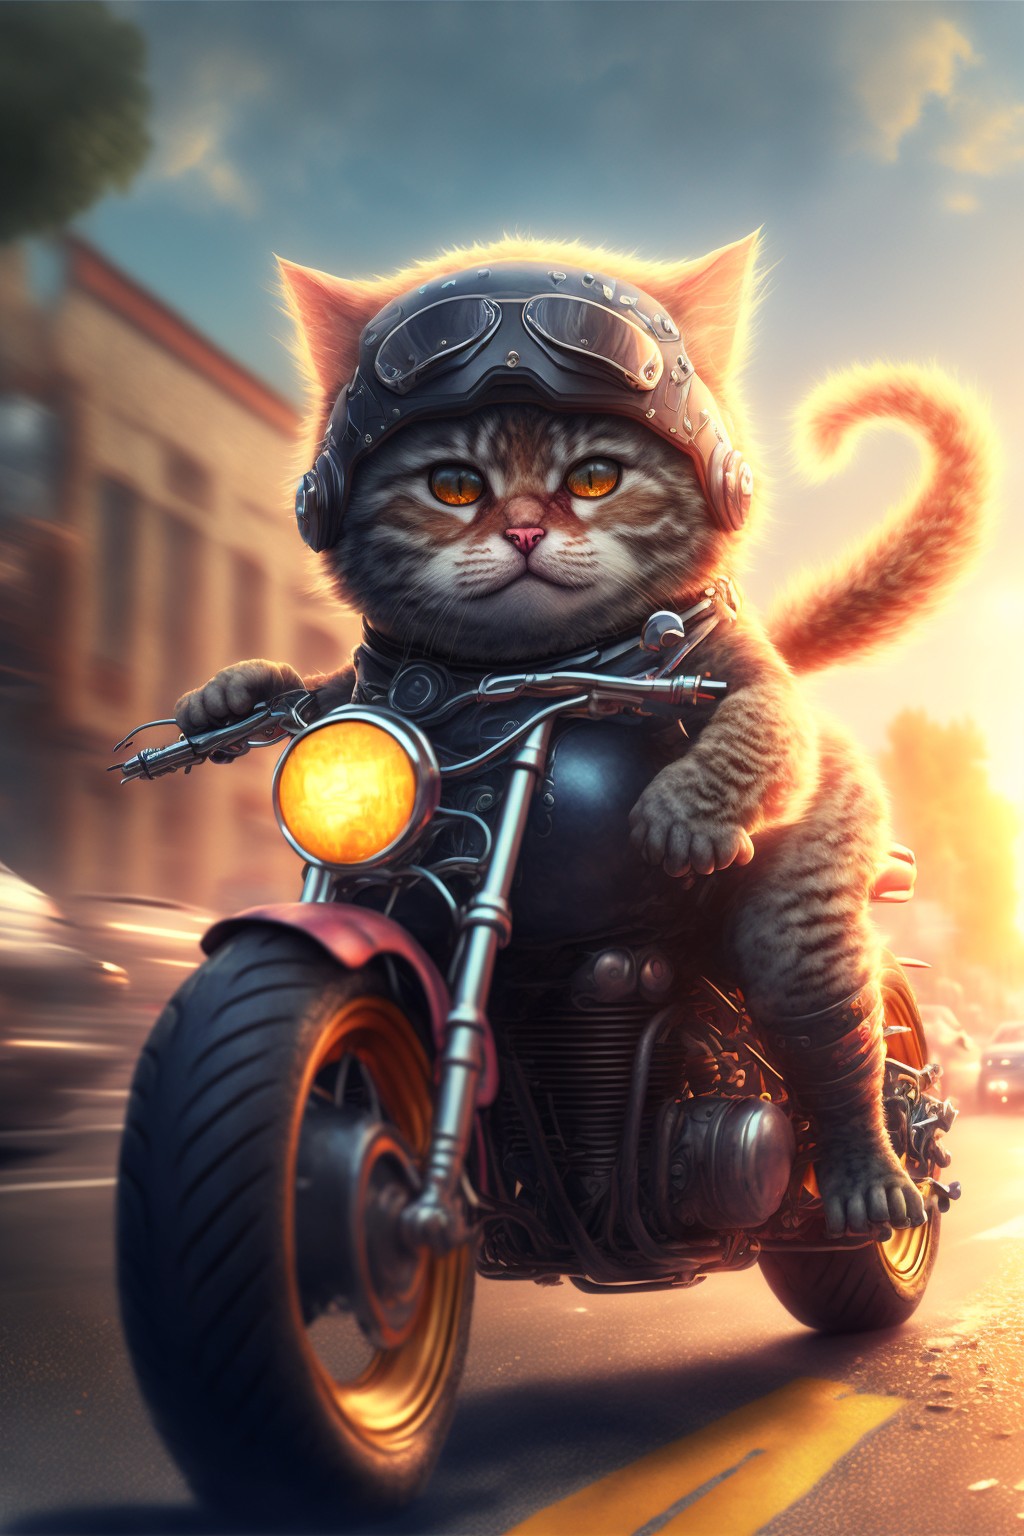 7 images of The rider kitten who goes to work facing the rising sun by Midjourney